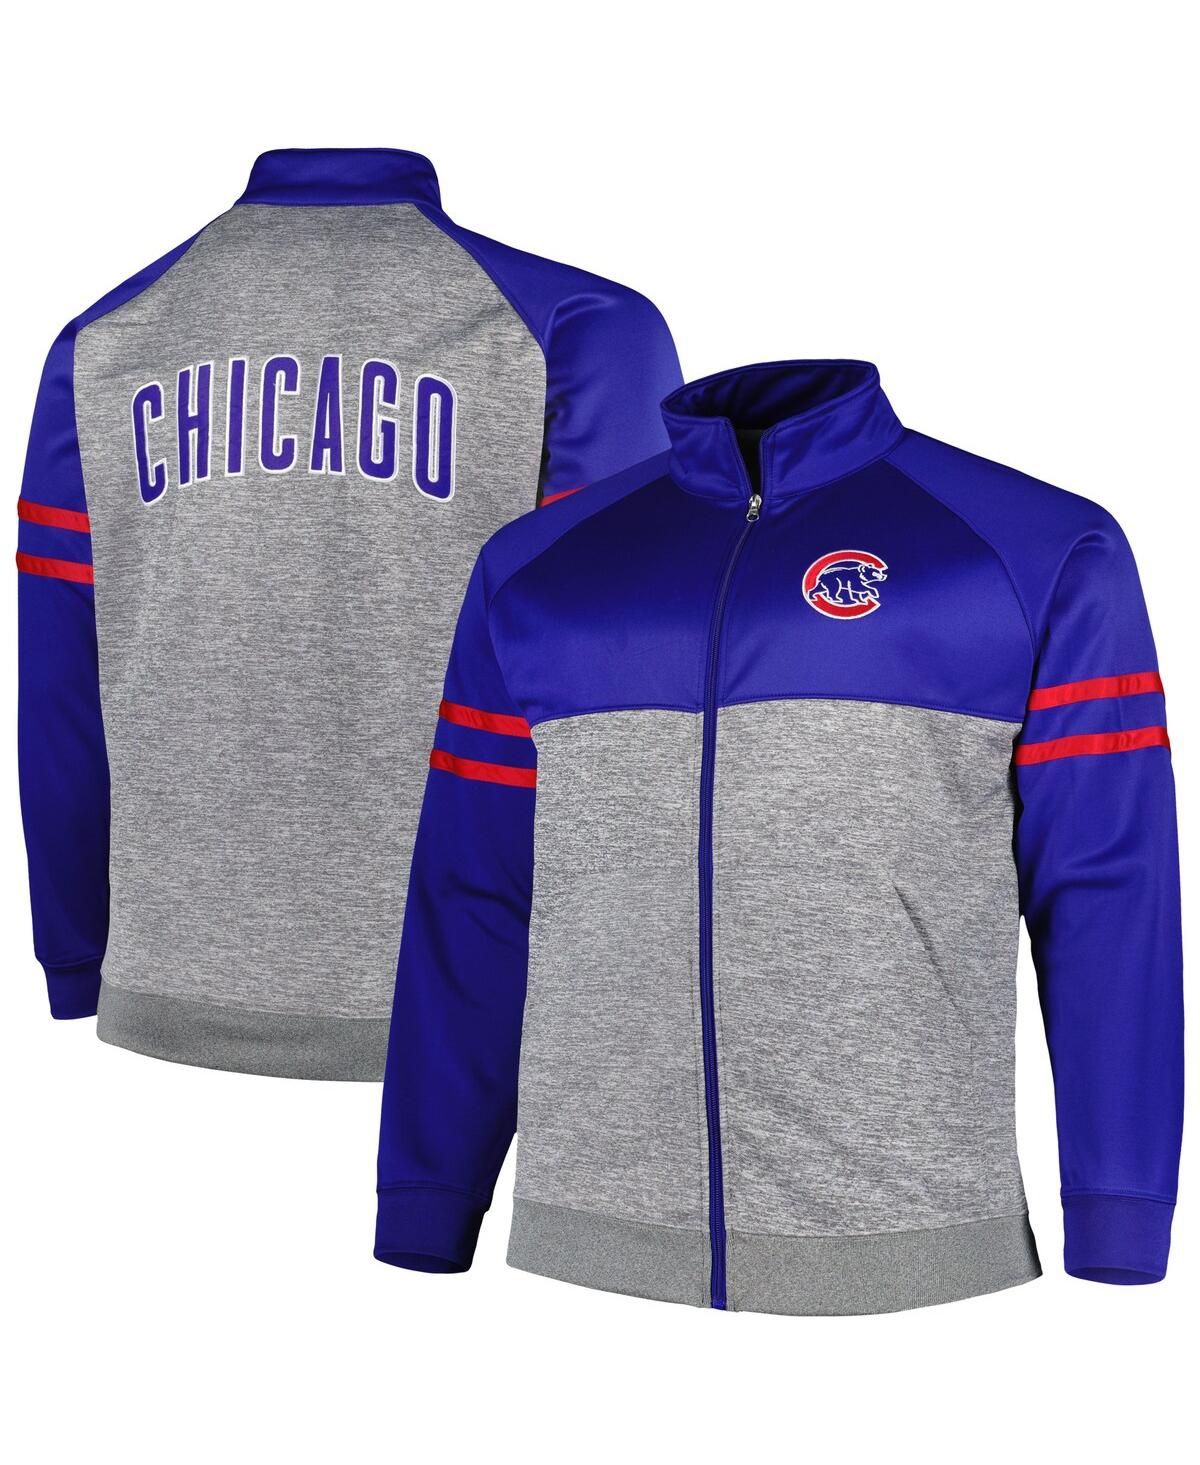 PROFILE MEN'S ROYAL, HEATHER GRAY CHICAGO CUBS BIG AND TALL RAGLAN FULL-ZIP TRACK JACKET